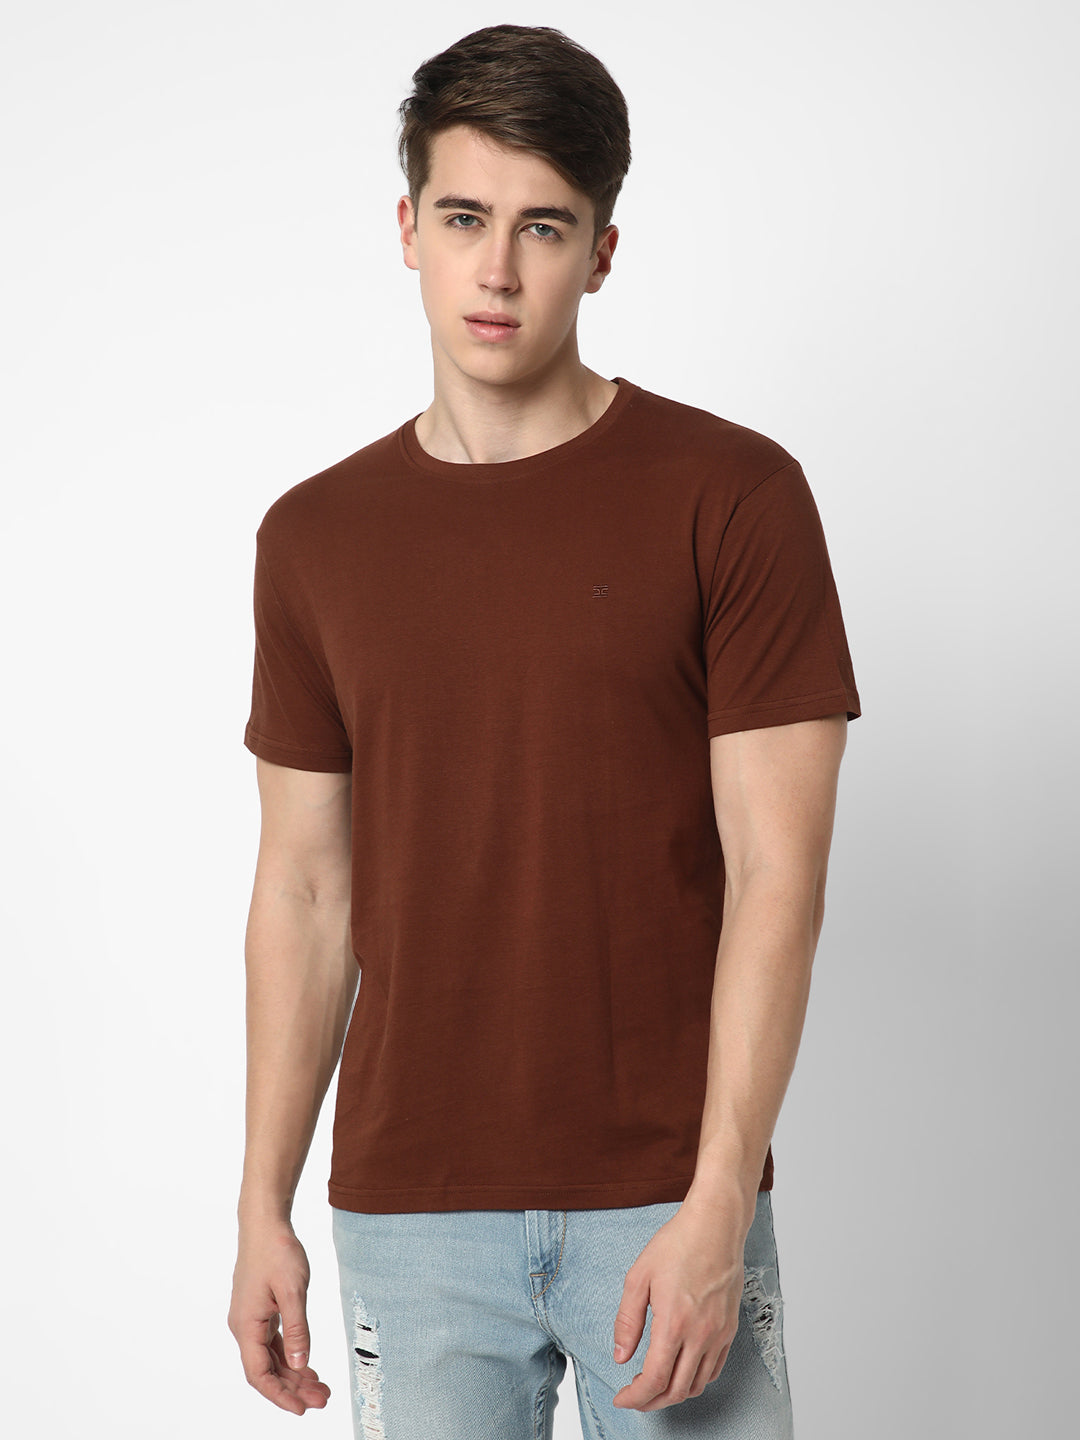 Cotstyle Cotton Fabrics Round Neck Short Length Plain Half Sleeve Casual & Daily Wear Men's T-Shirts -  Pack of 1 - Brown